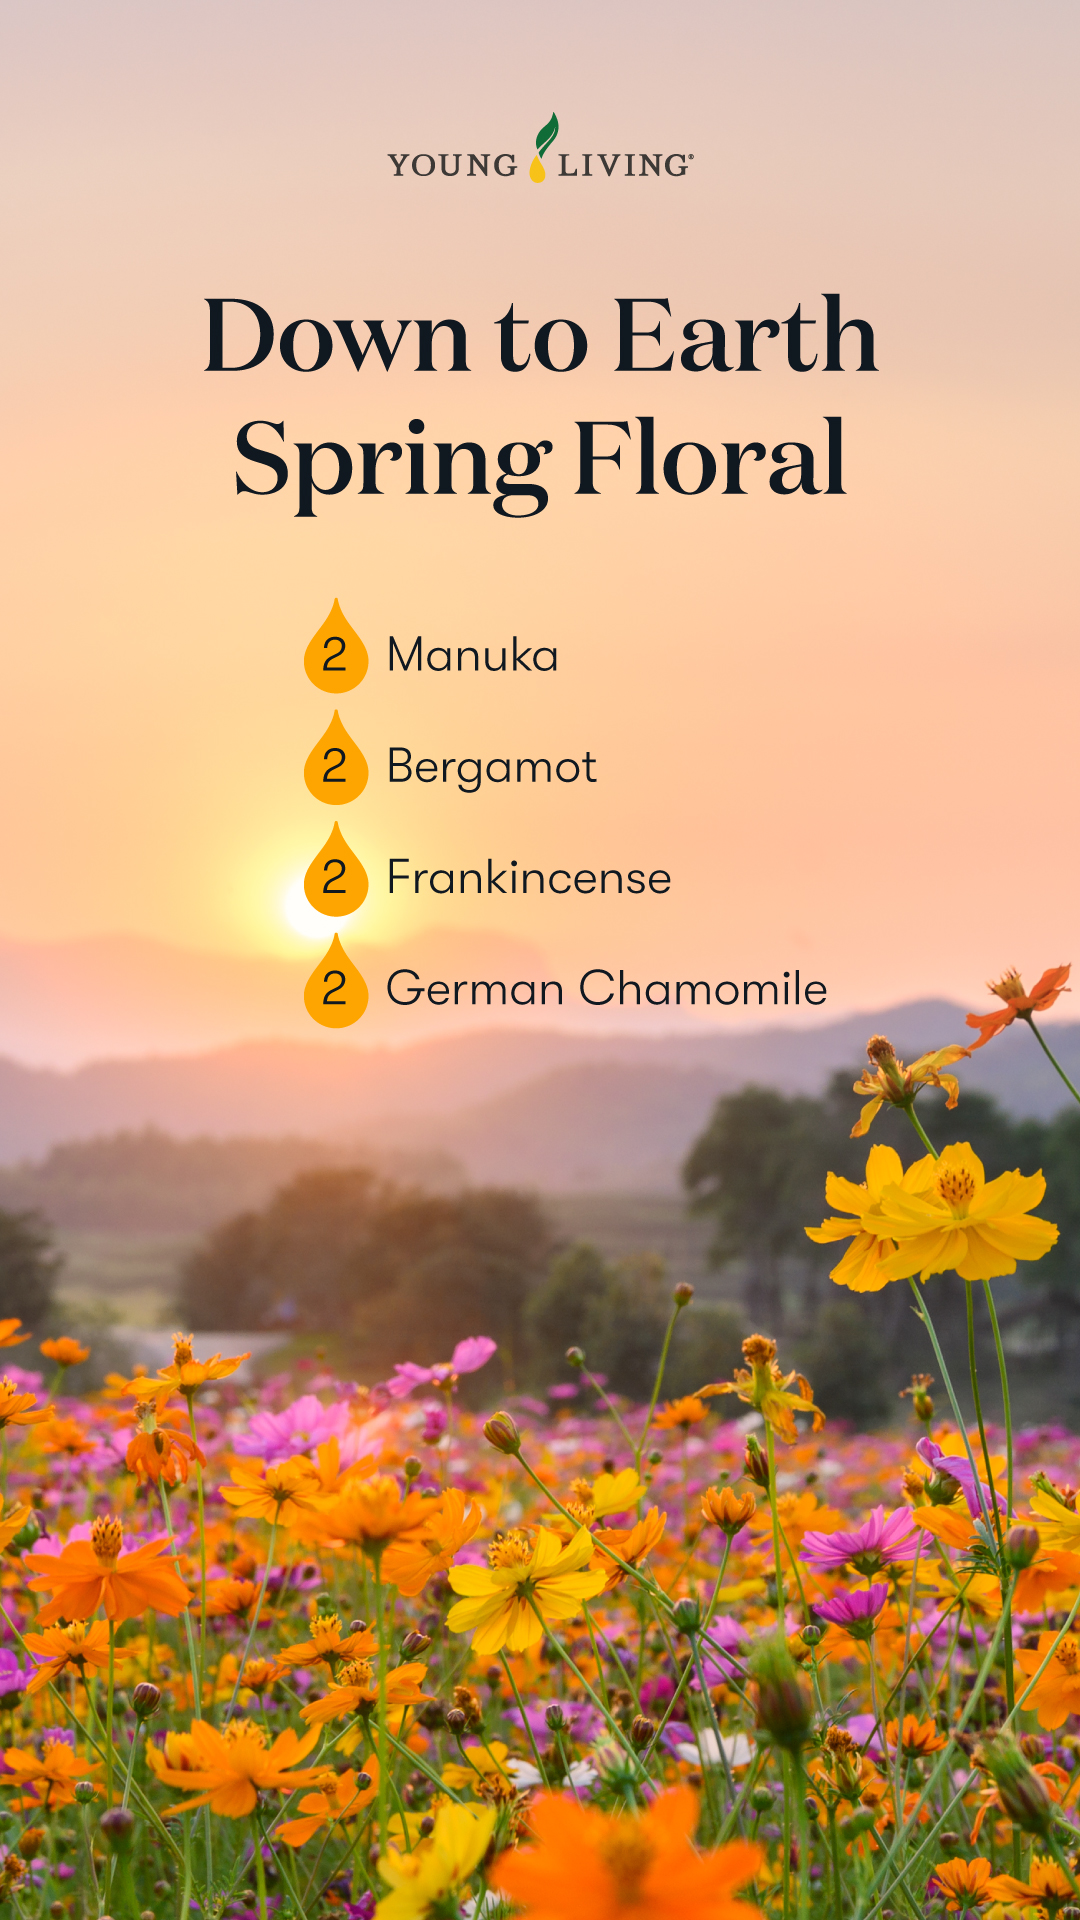 Down to Earth Spring Floral - Spring Diffuser blends